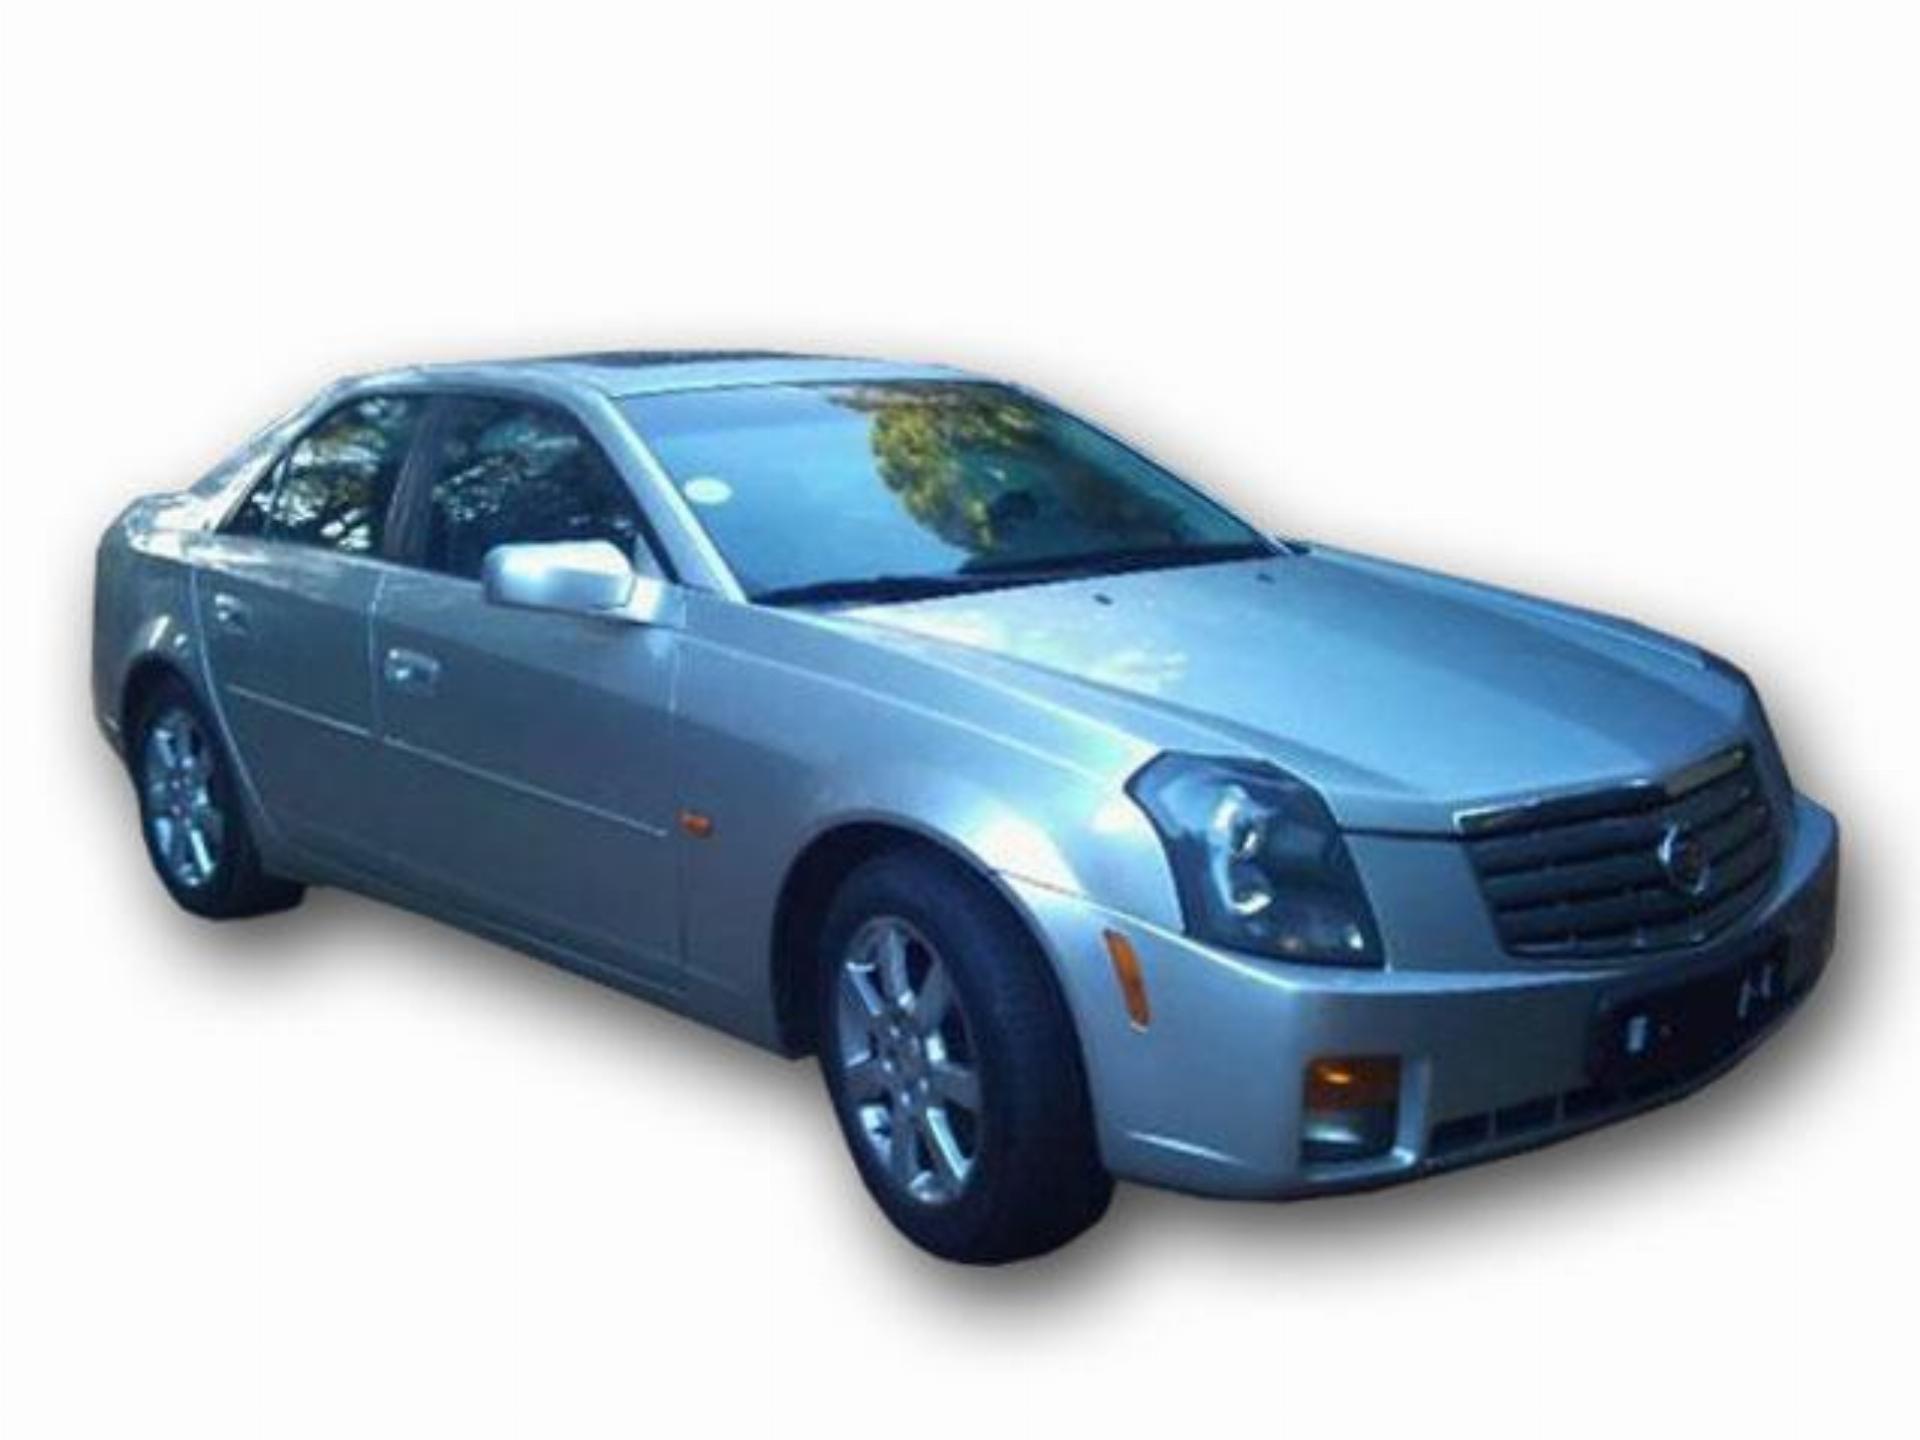 Cadillac CTS 3.6L V6 AUTO. Faulty GEARBOX.